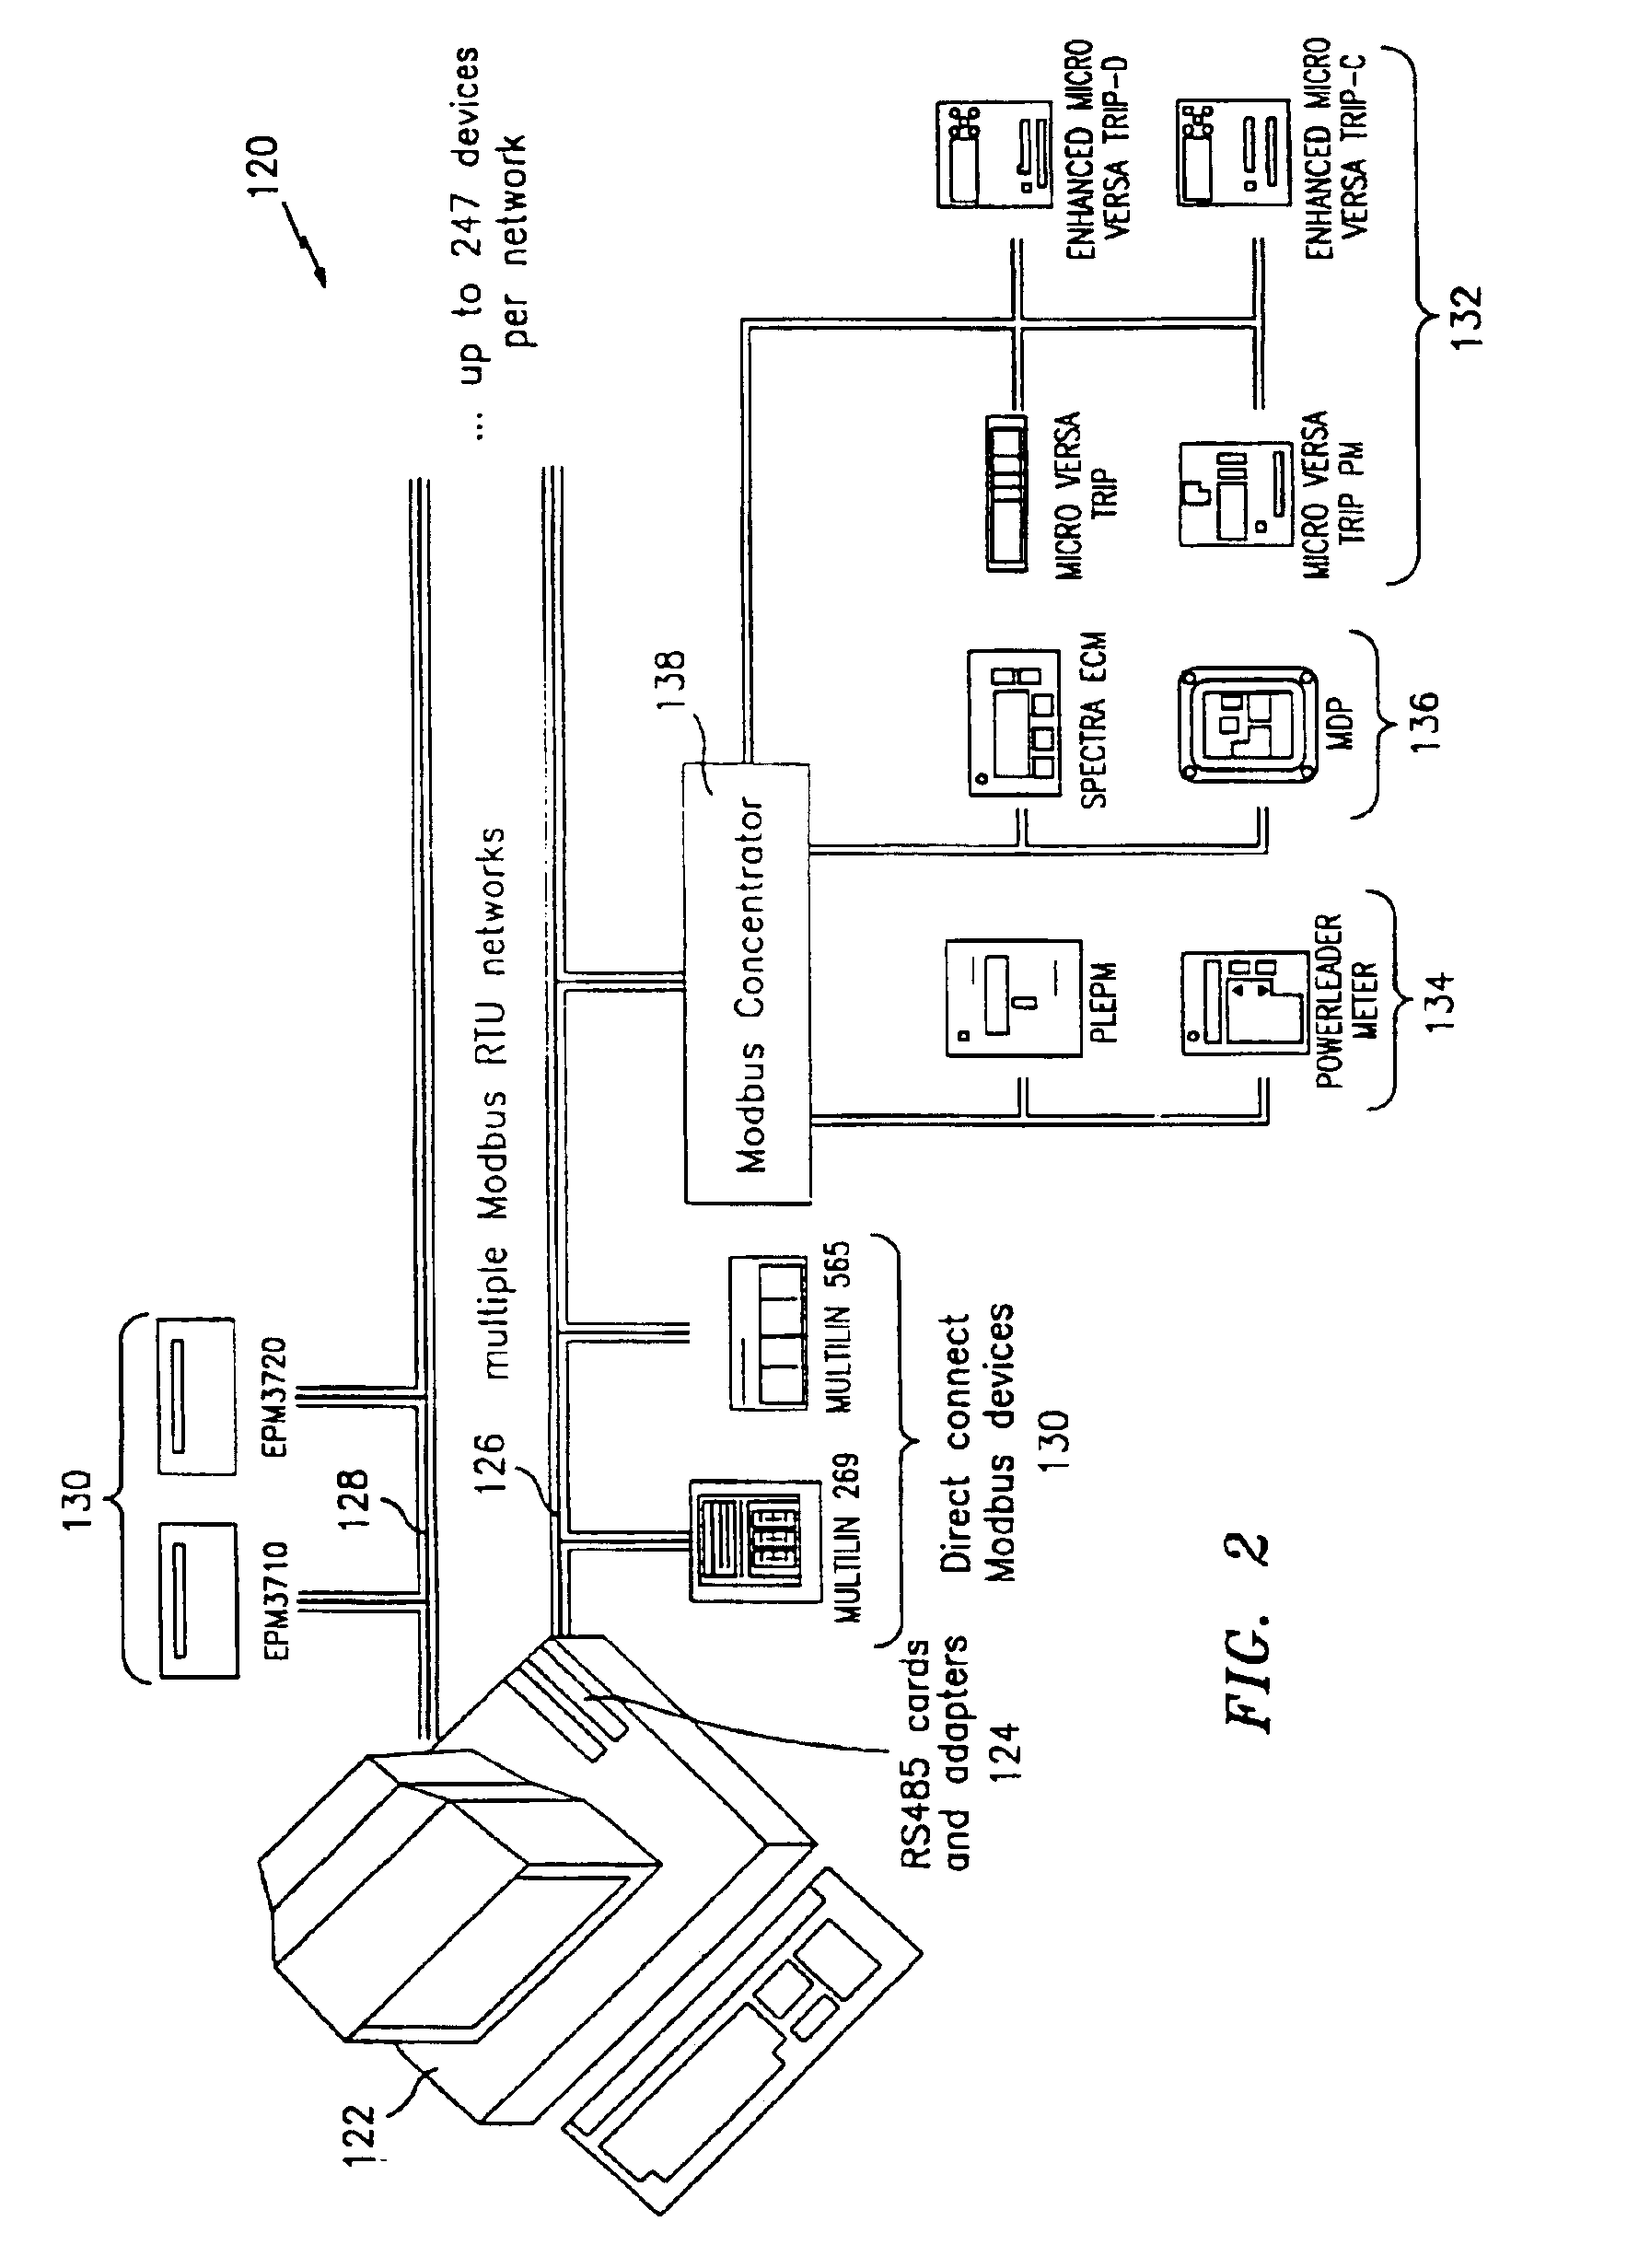 Man machine interface for power management control systems